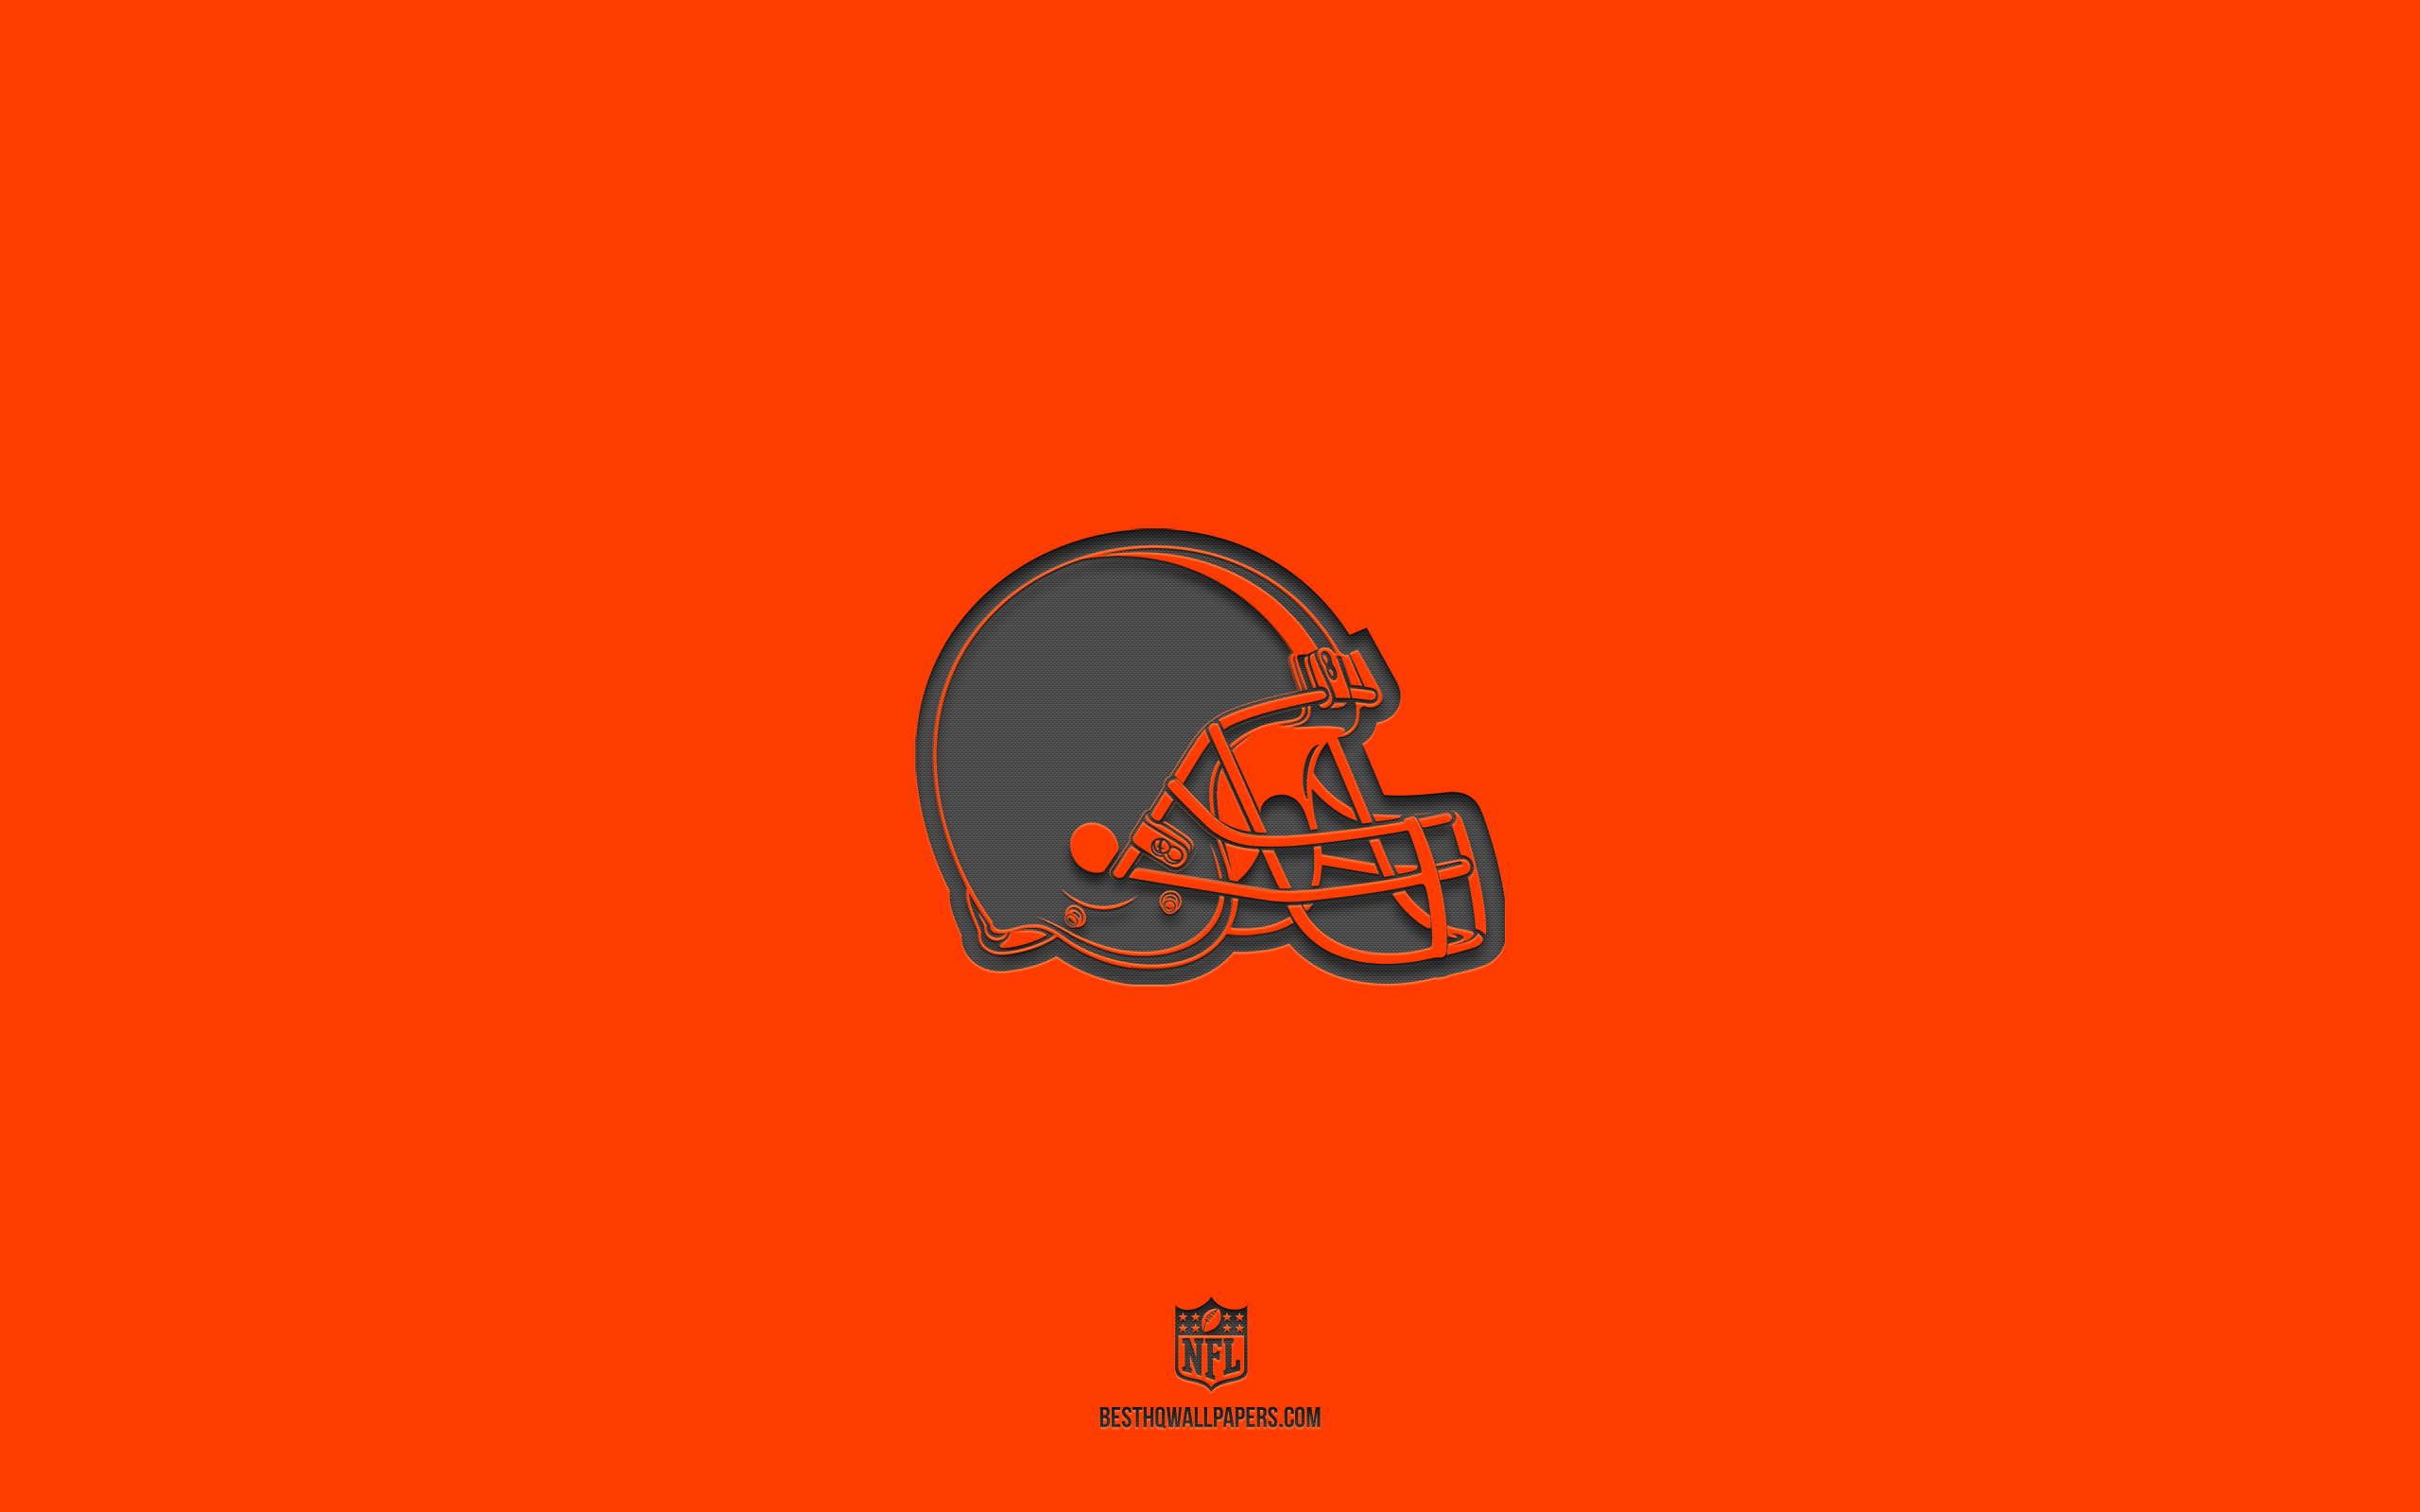 Download wallpaper Cleveland Browns, orange background, American football team, Cleveland Browns emblem, NFL, USA, American football, Cleveland Browns logo for desktop with resolution 2560x1600. High Quality HD picture wallpaper